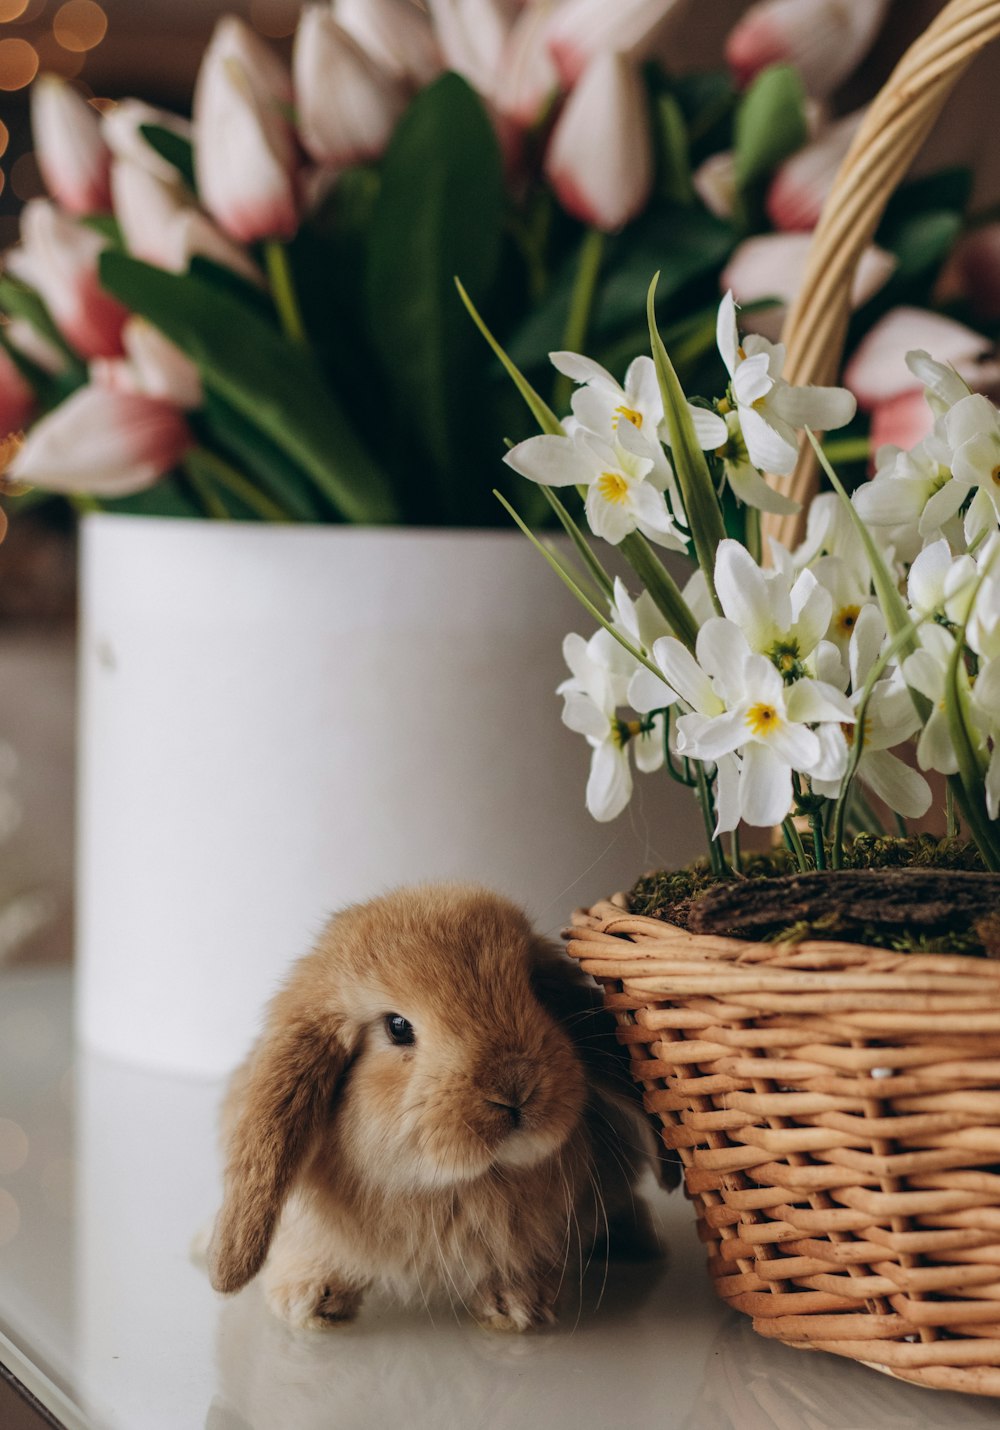 a small rabbit sitting next to a basket with flowers